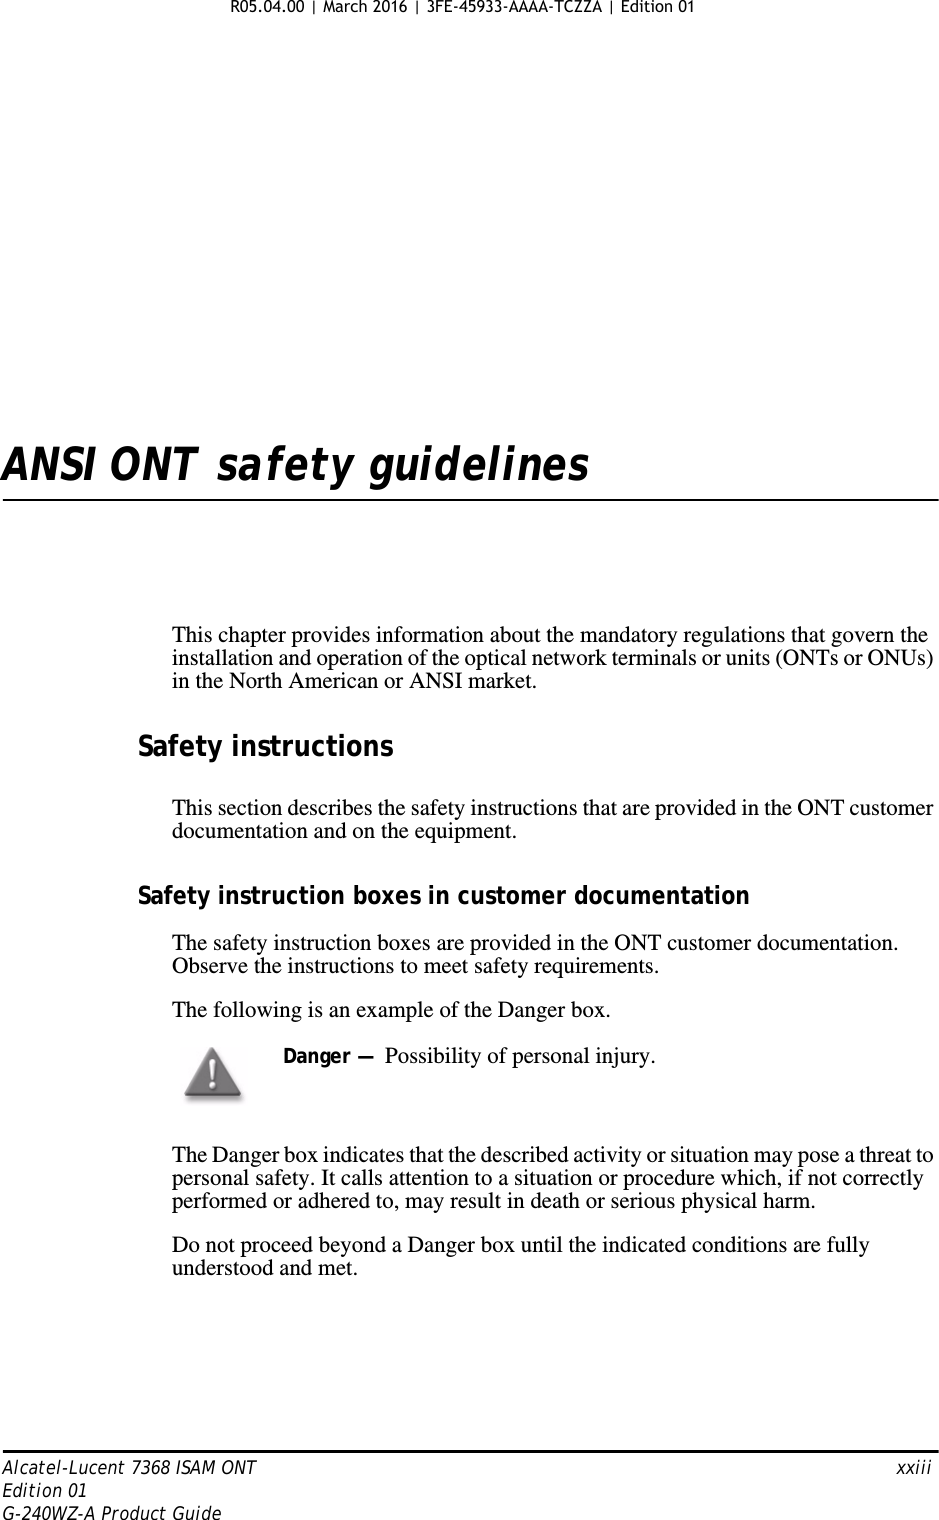 Alcatel-Lucent 7368 ISAM ONT   xxiiiEdition 01G-240WZ-A Product GuideANSI ONT safety guidelinesThis chapter provides information about the mandatory regulations that govern the installation and operation of the optical network terminals or units (ONTs or ONUs) in the North American or ANSI market.Safety instructionsThis section describes the safety instructions that are provided in the ONT customer documentation and on the equipment.Safety instruction boxes in customer documentationThe safety instruction boxes are provided in the ONT customer documentation. Observe the instructions to meet safety requirements.The following is an example of the Danger box.The Danger box indicates that the described activity or situation may pose a threat to personal safety. It calls attention to a situation or procedure which, if not correctly performed or adhered to, may result in death or serious physical harm. Do not proceed beyond a Danger box until the indicated conditions are fully understood and met.Danger —  Possibility of personal injury. R05.04.00 | March 2016 | 3FE-45933-AAAA-TCZZA | Edition 01 